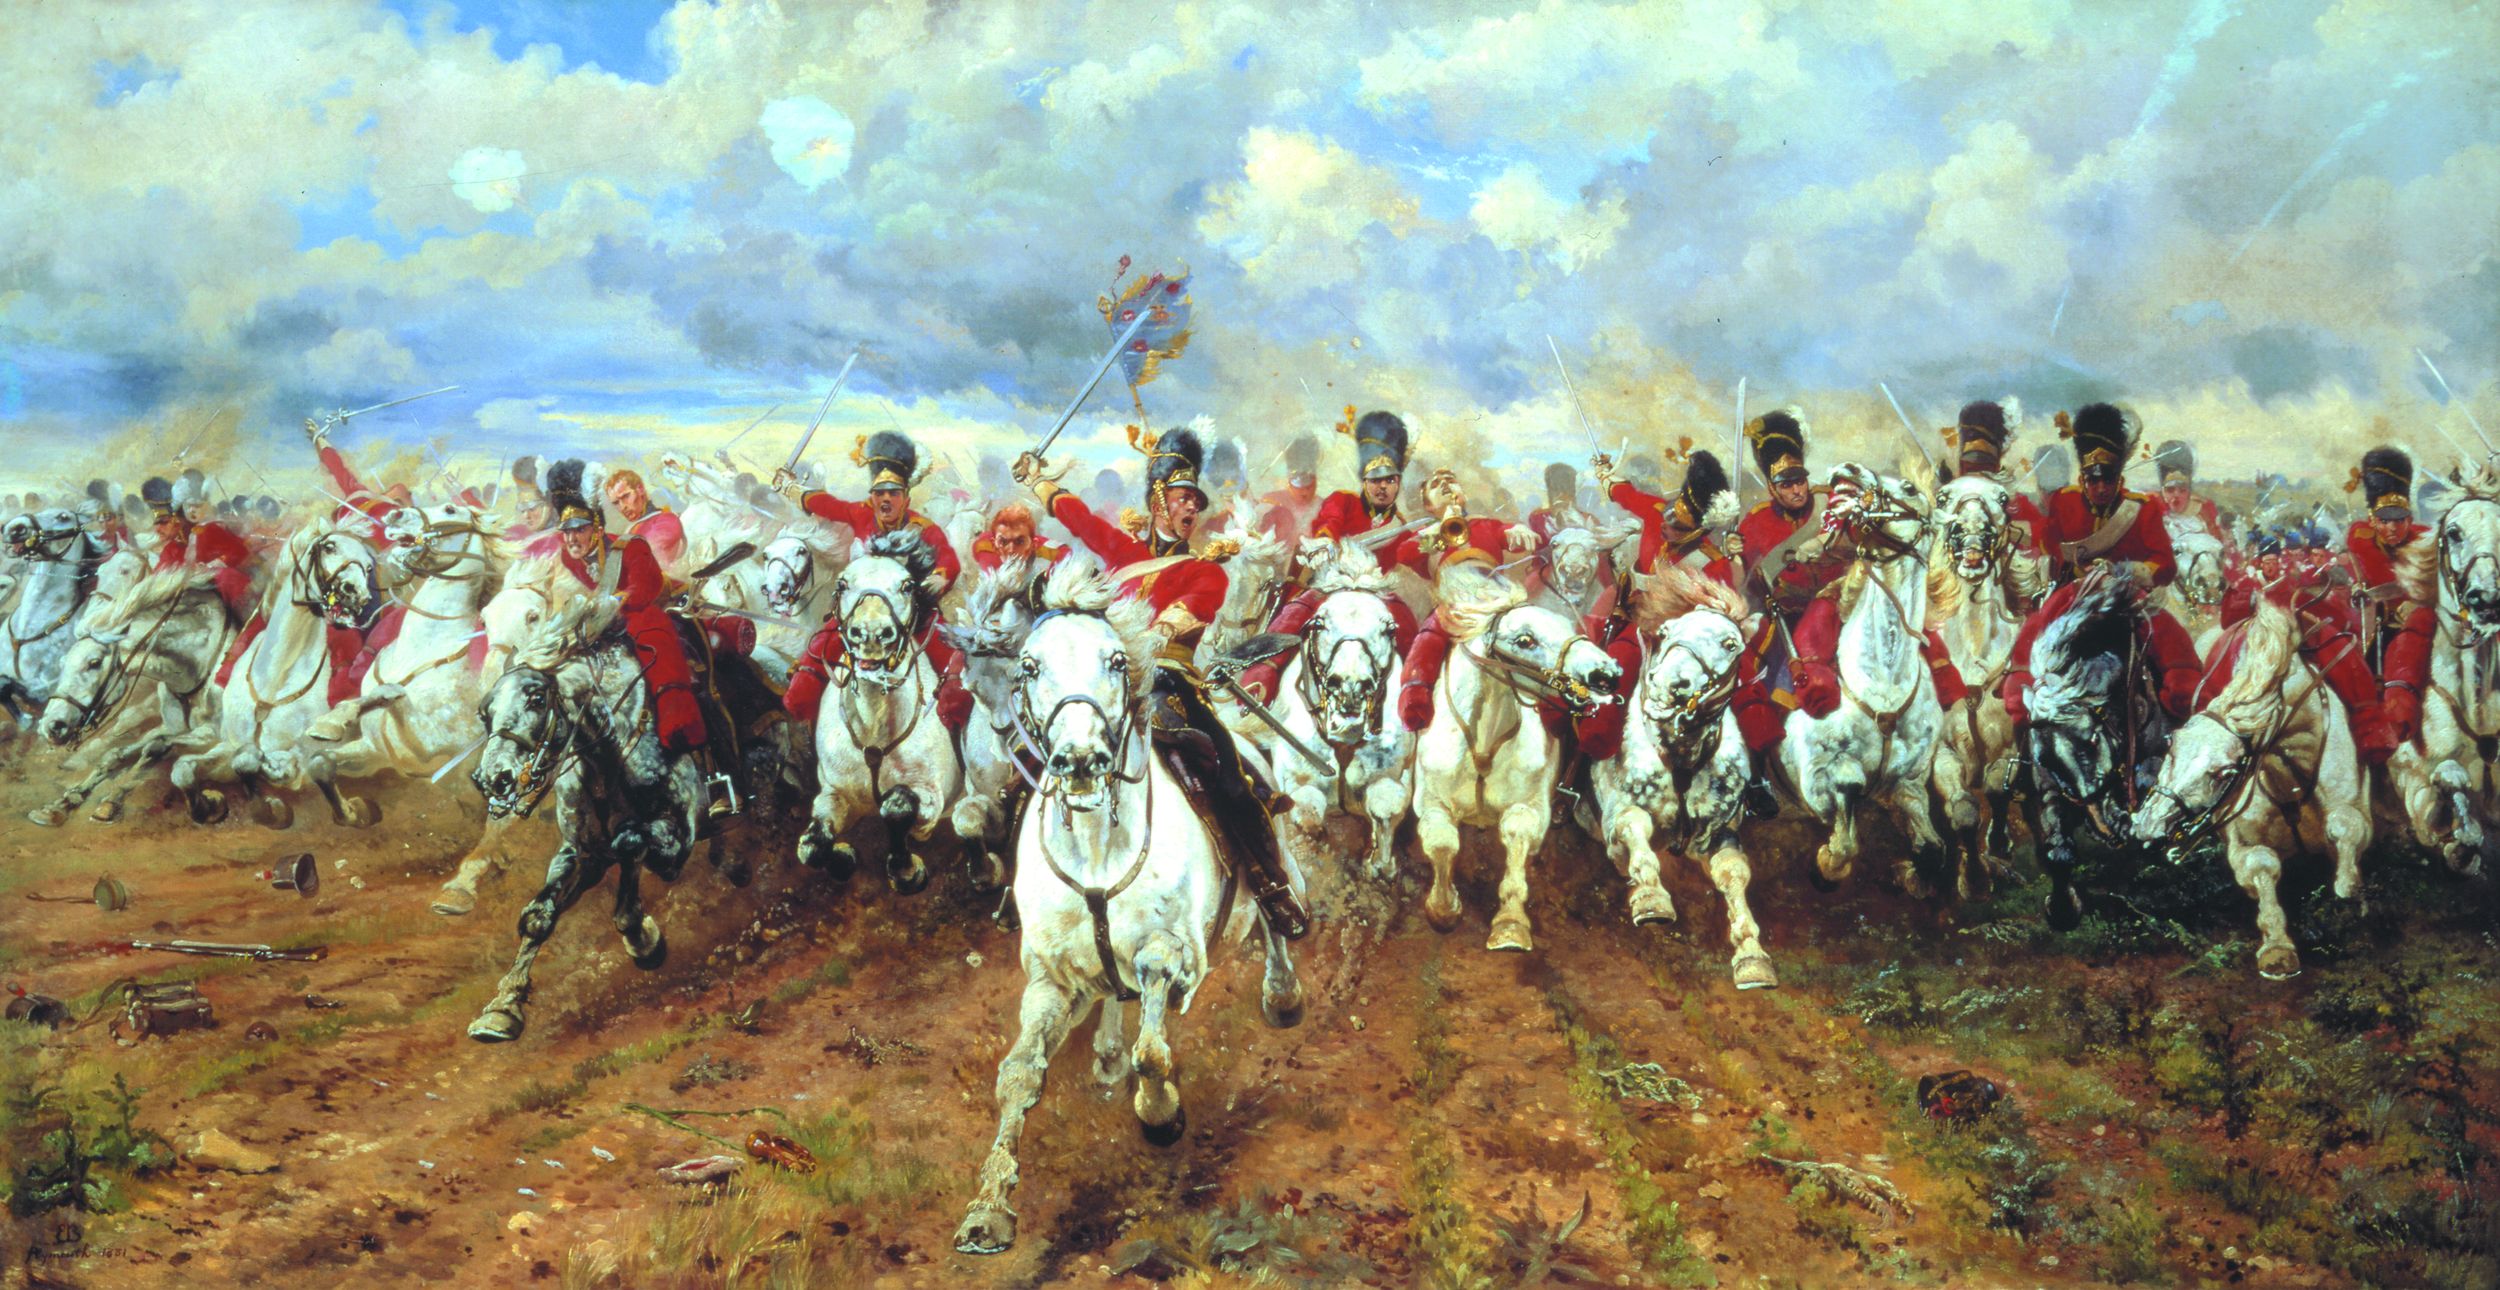 Lady Butler’s classic painting, “Scotland Forever,” depicts the charge of the Royal Scots Greys, part of the British heavy cavalry.